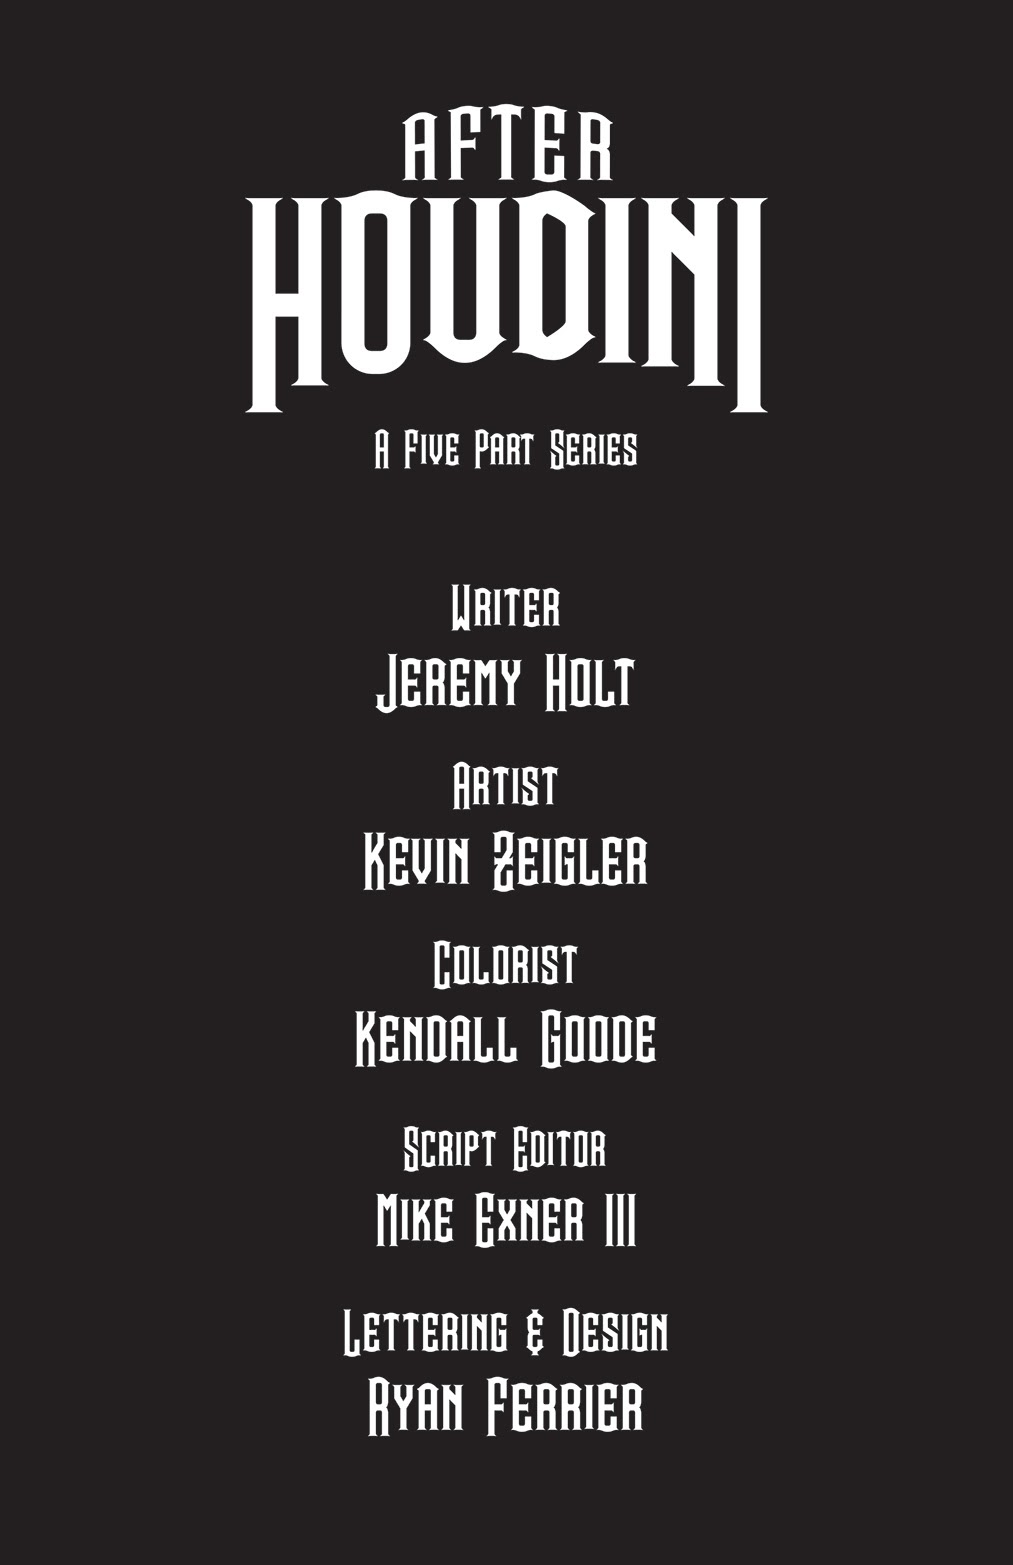 Read online After Houdini comic -  Issue # Full - 2